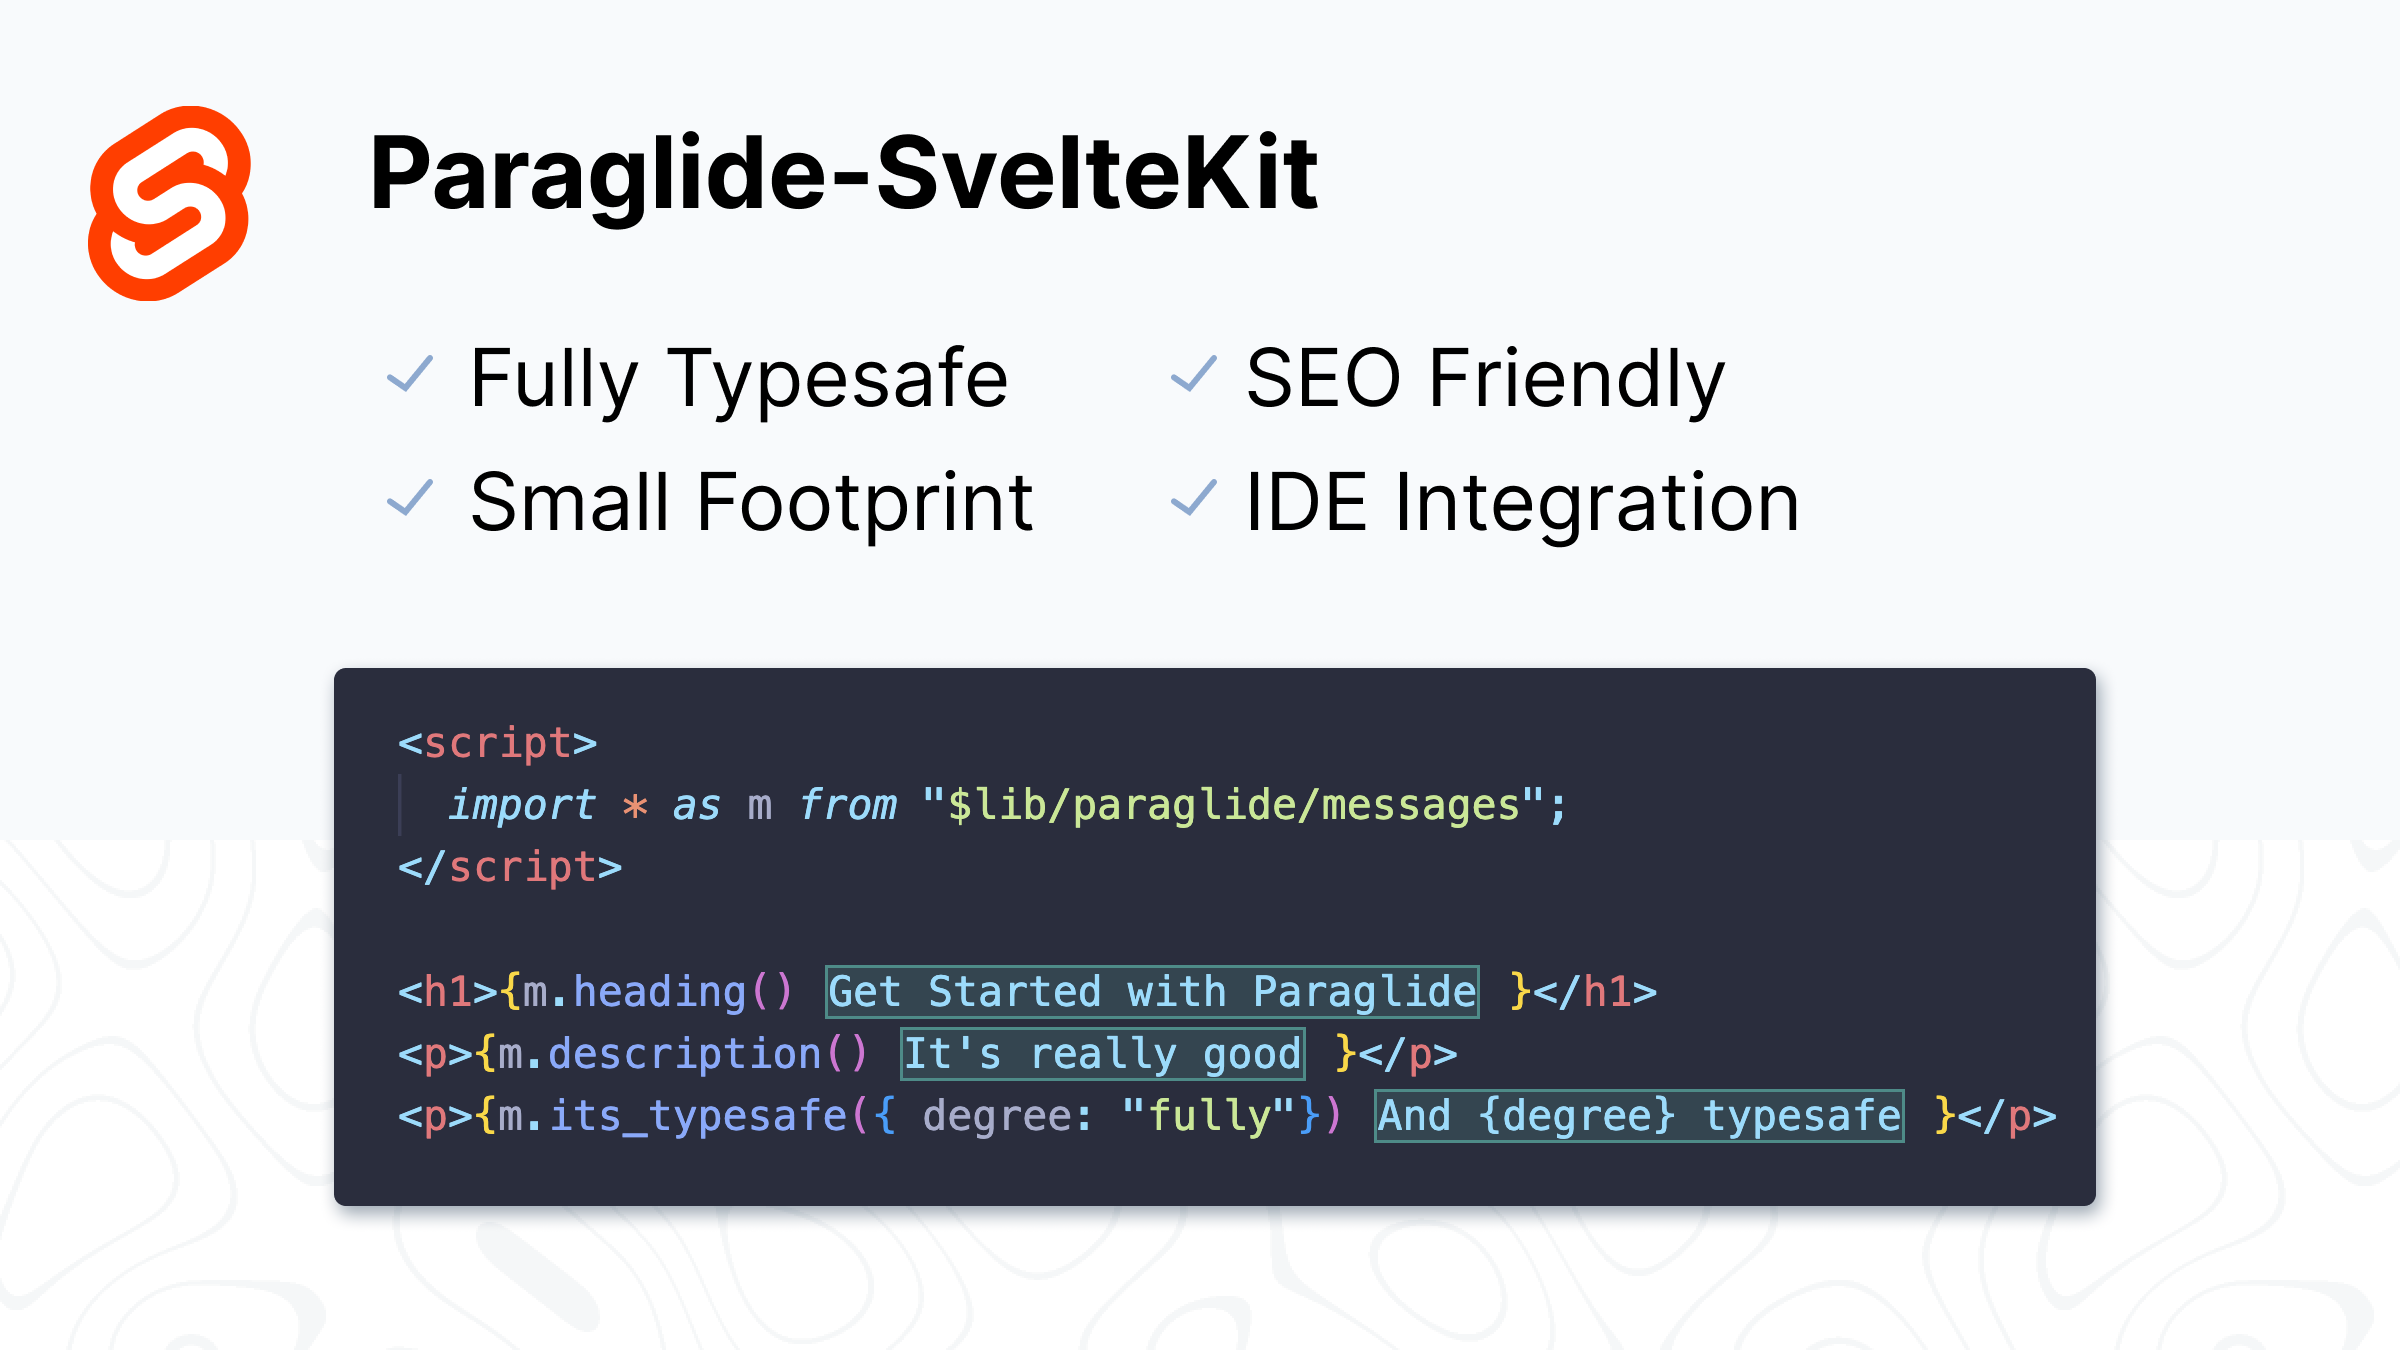 Dead Simple i18n. Typesafe, Small Footprint, SEO-Friendly and, with an IDE Integration.